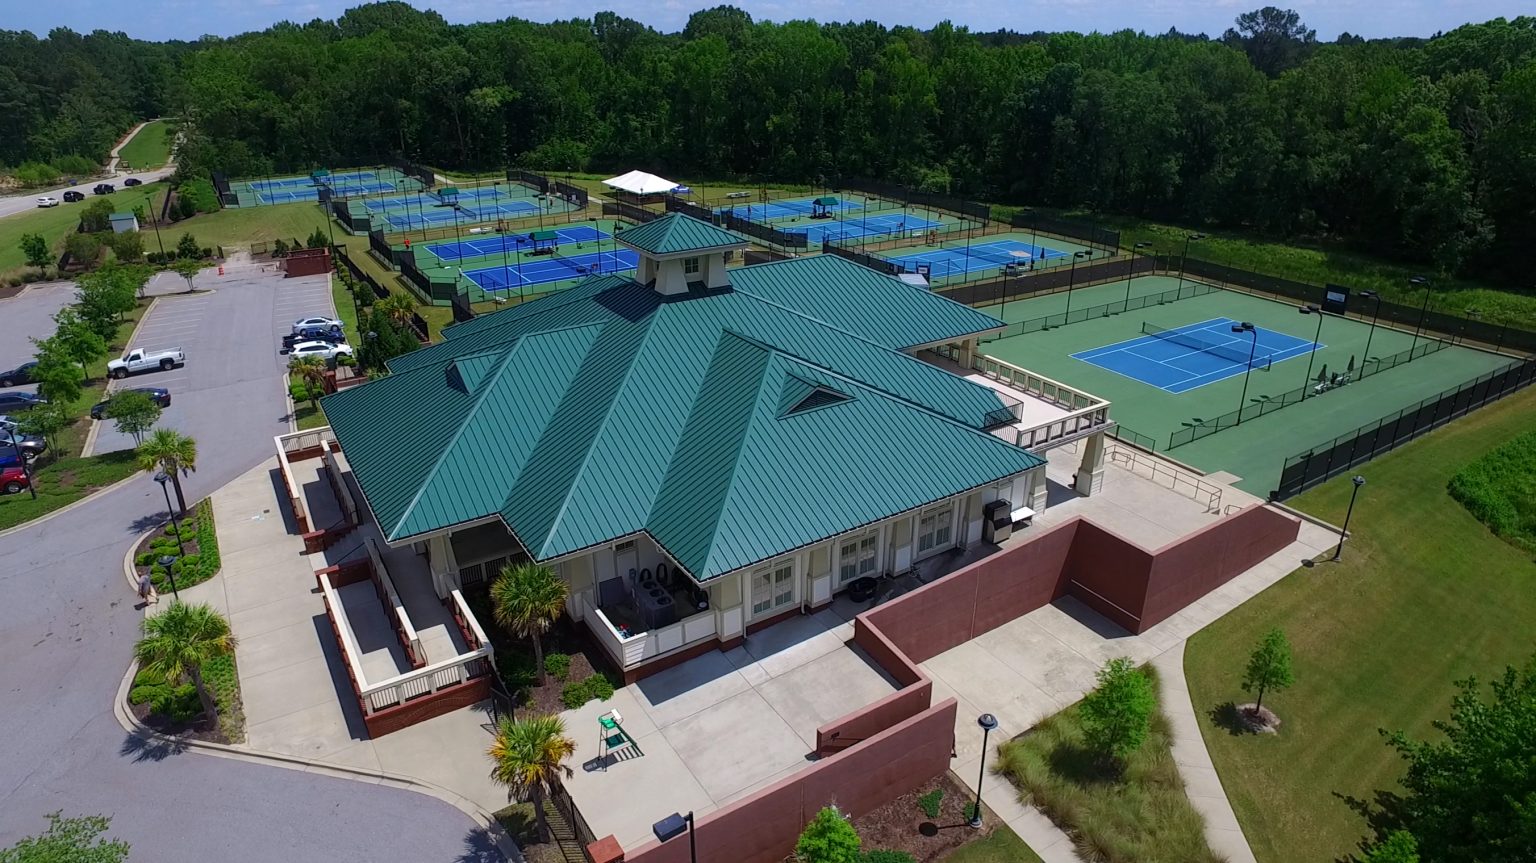 CAYCE TENNIS AND FITNESS CENTER